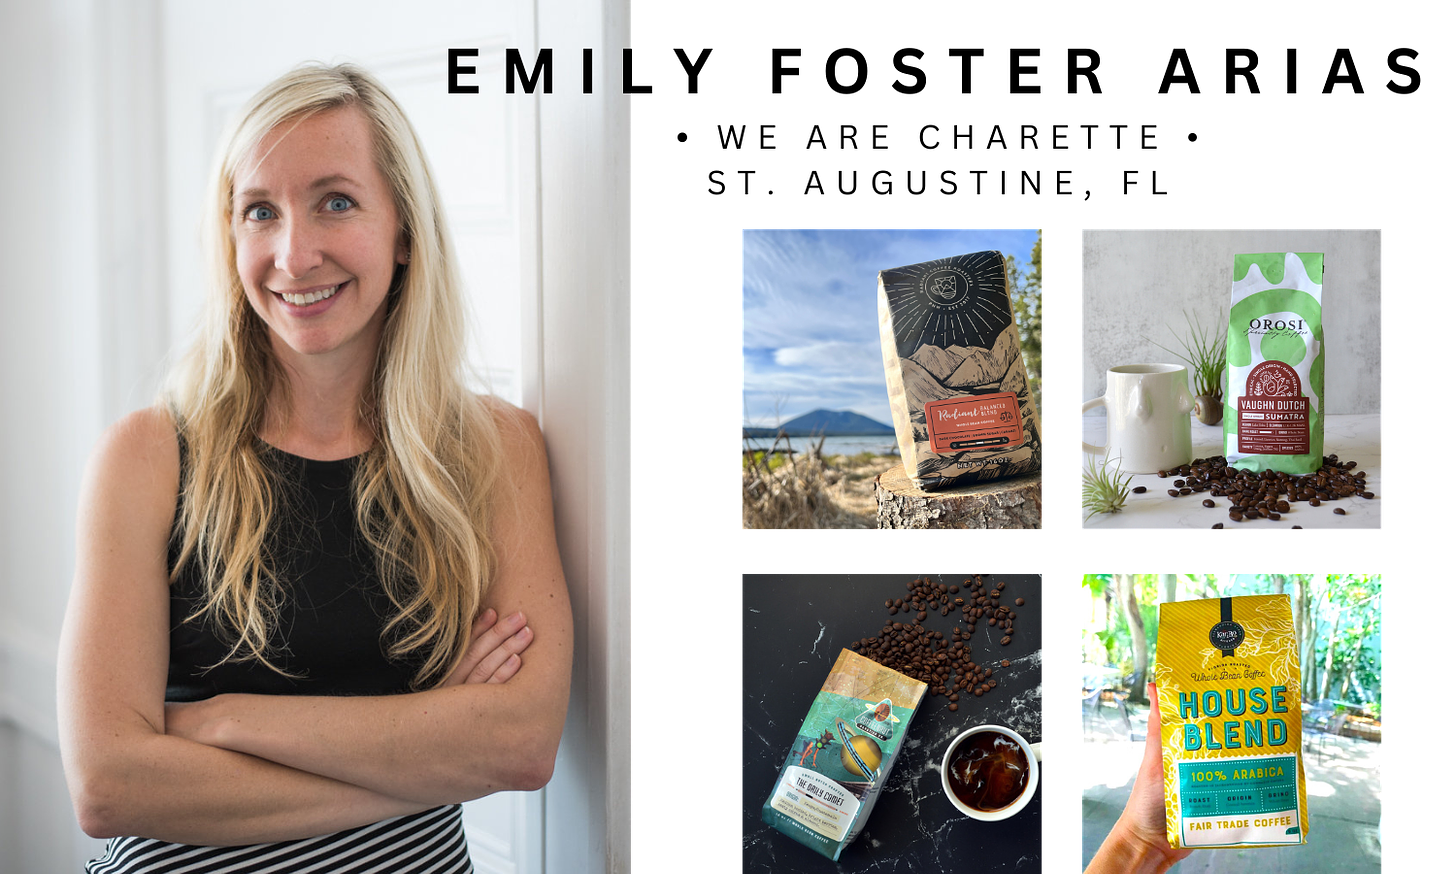 A blond woman wearing a black tank top with her arms crossed smiles at the camera on the left. On the right is are 4 individual coffee bag design lifestyle photographs in squares.